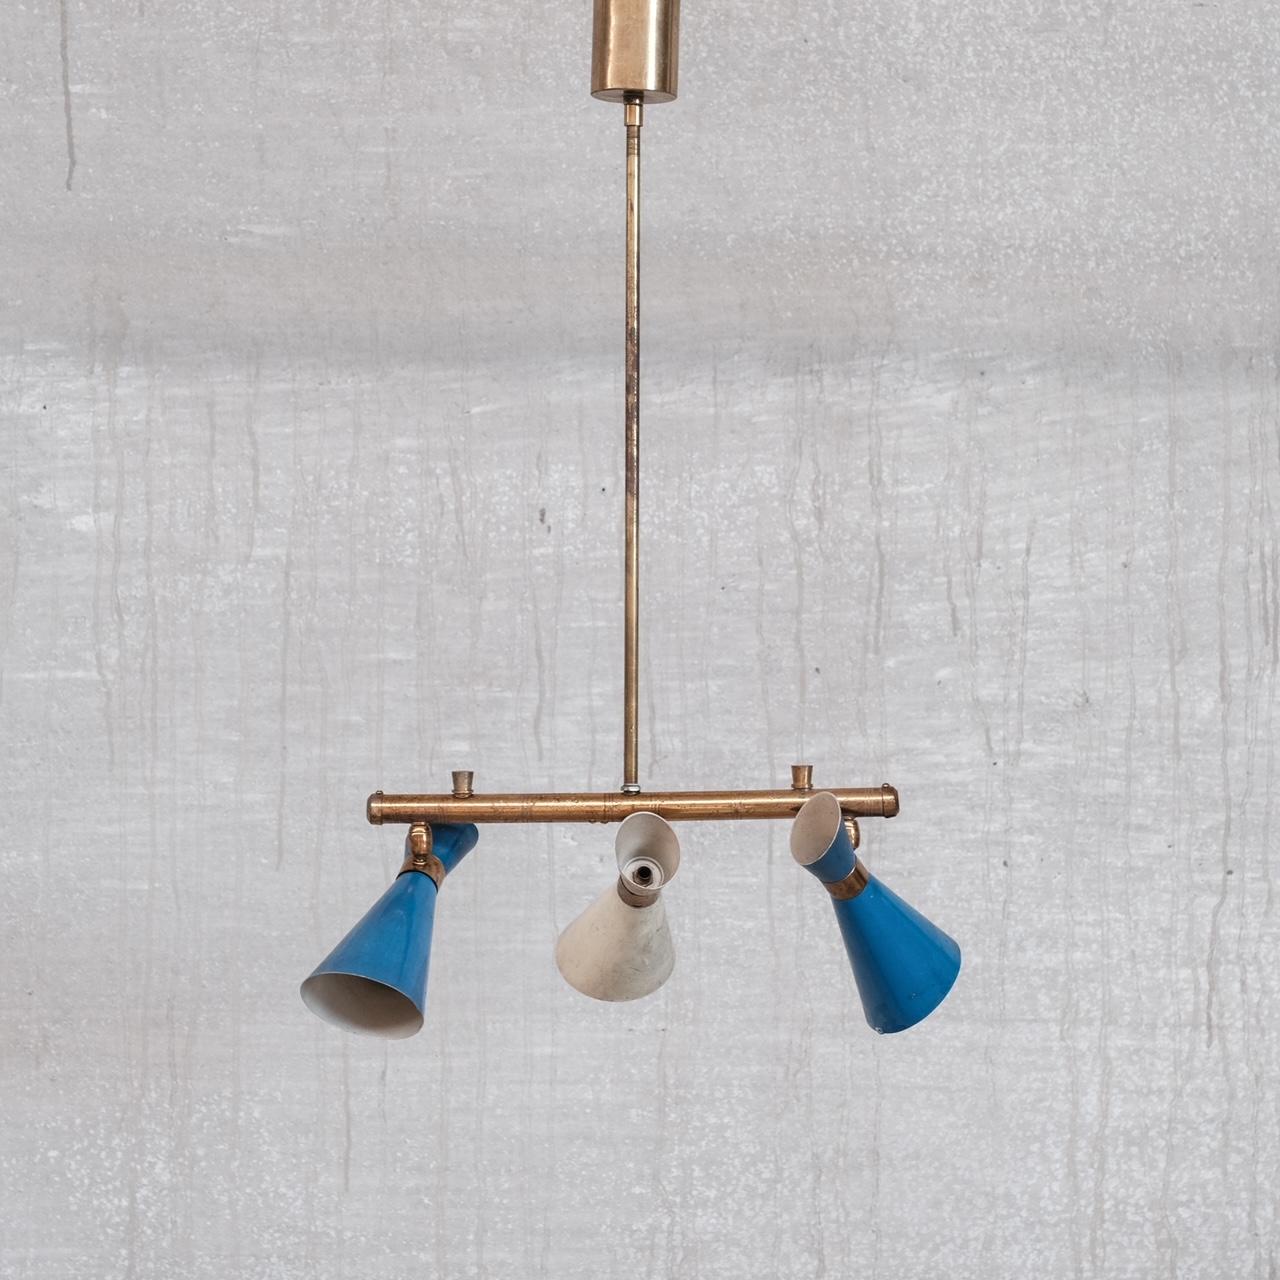 A brass adjustables three way pendant light.

Italy, c1960s.

Original blue and white painted shades, these could be repsrayed upon request.

Good vintage condition, some patination to the brass, some wear to the paint.

Location: Belgium